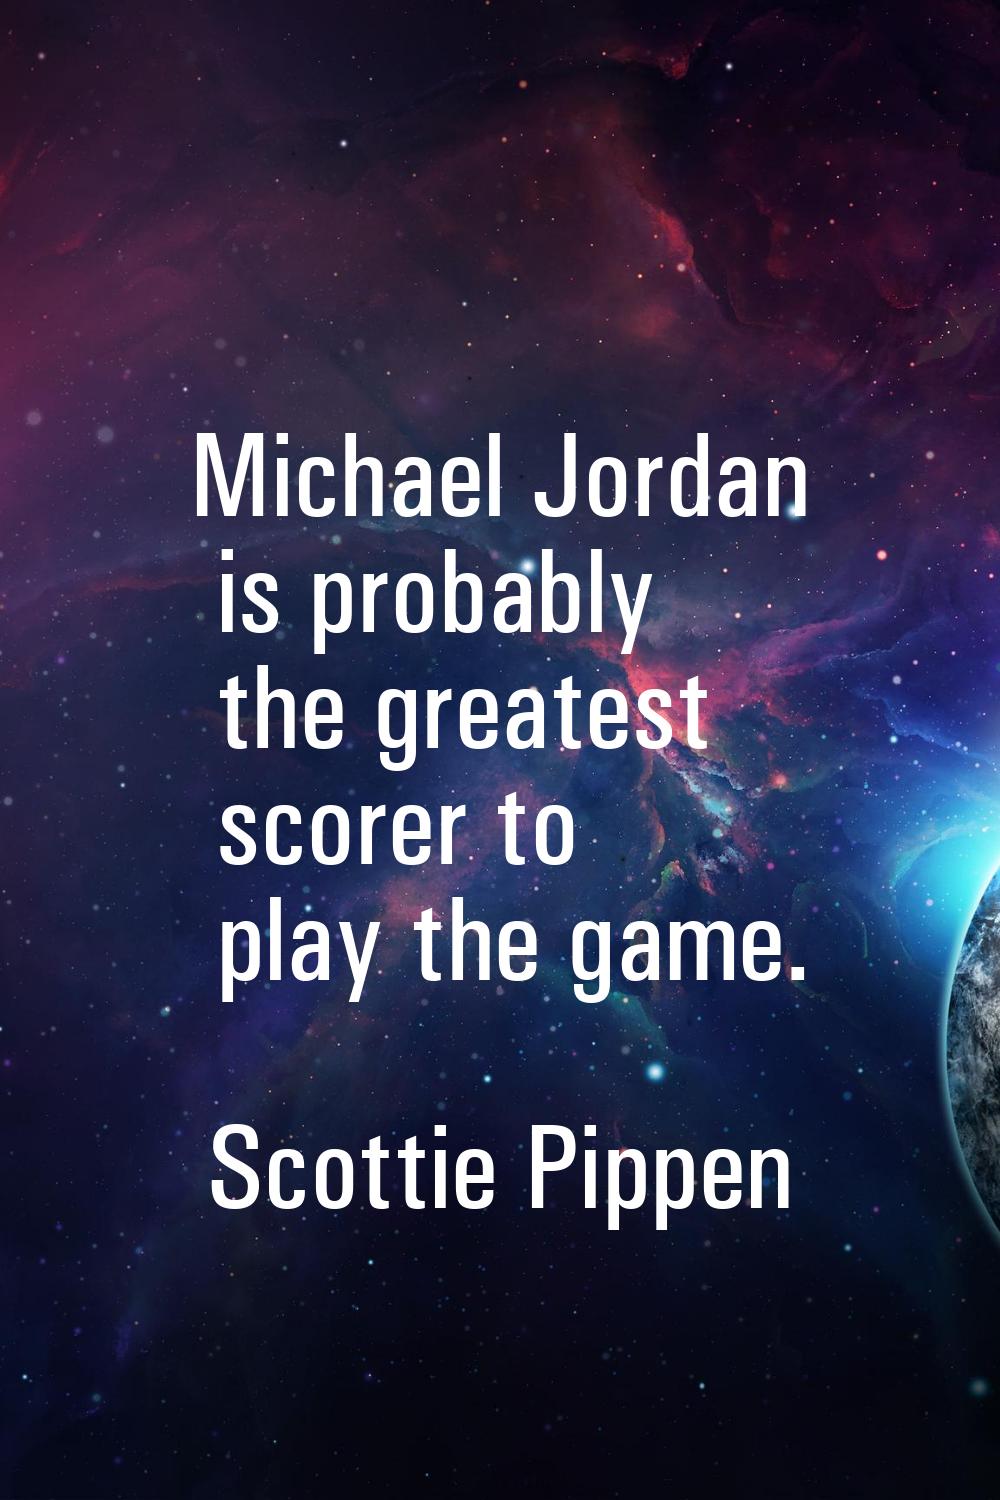 Michael Jordan is probably the greatest scorer to play the game.